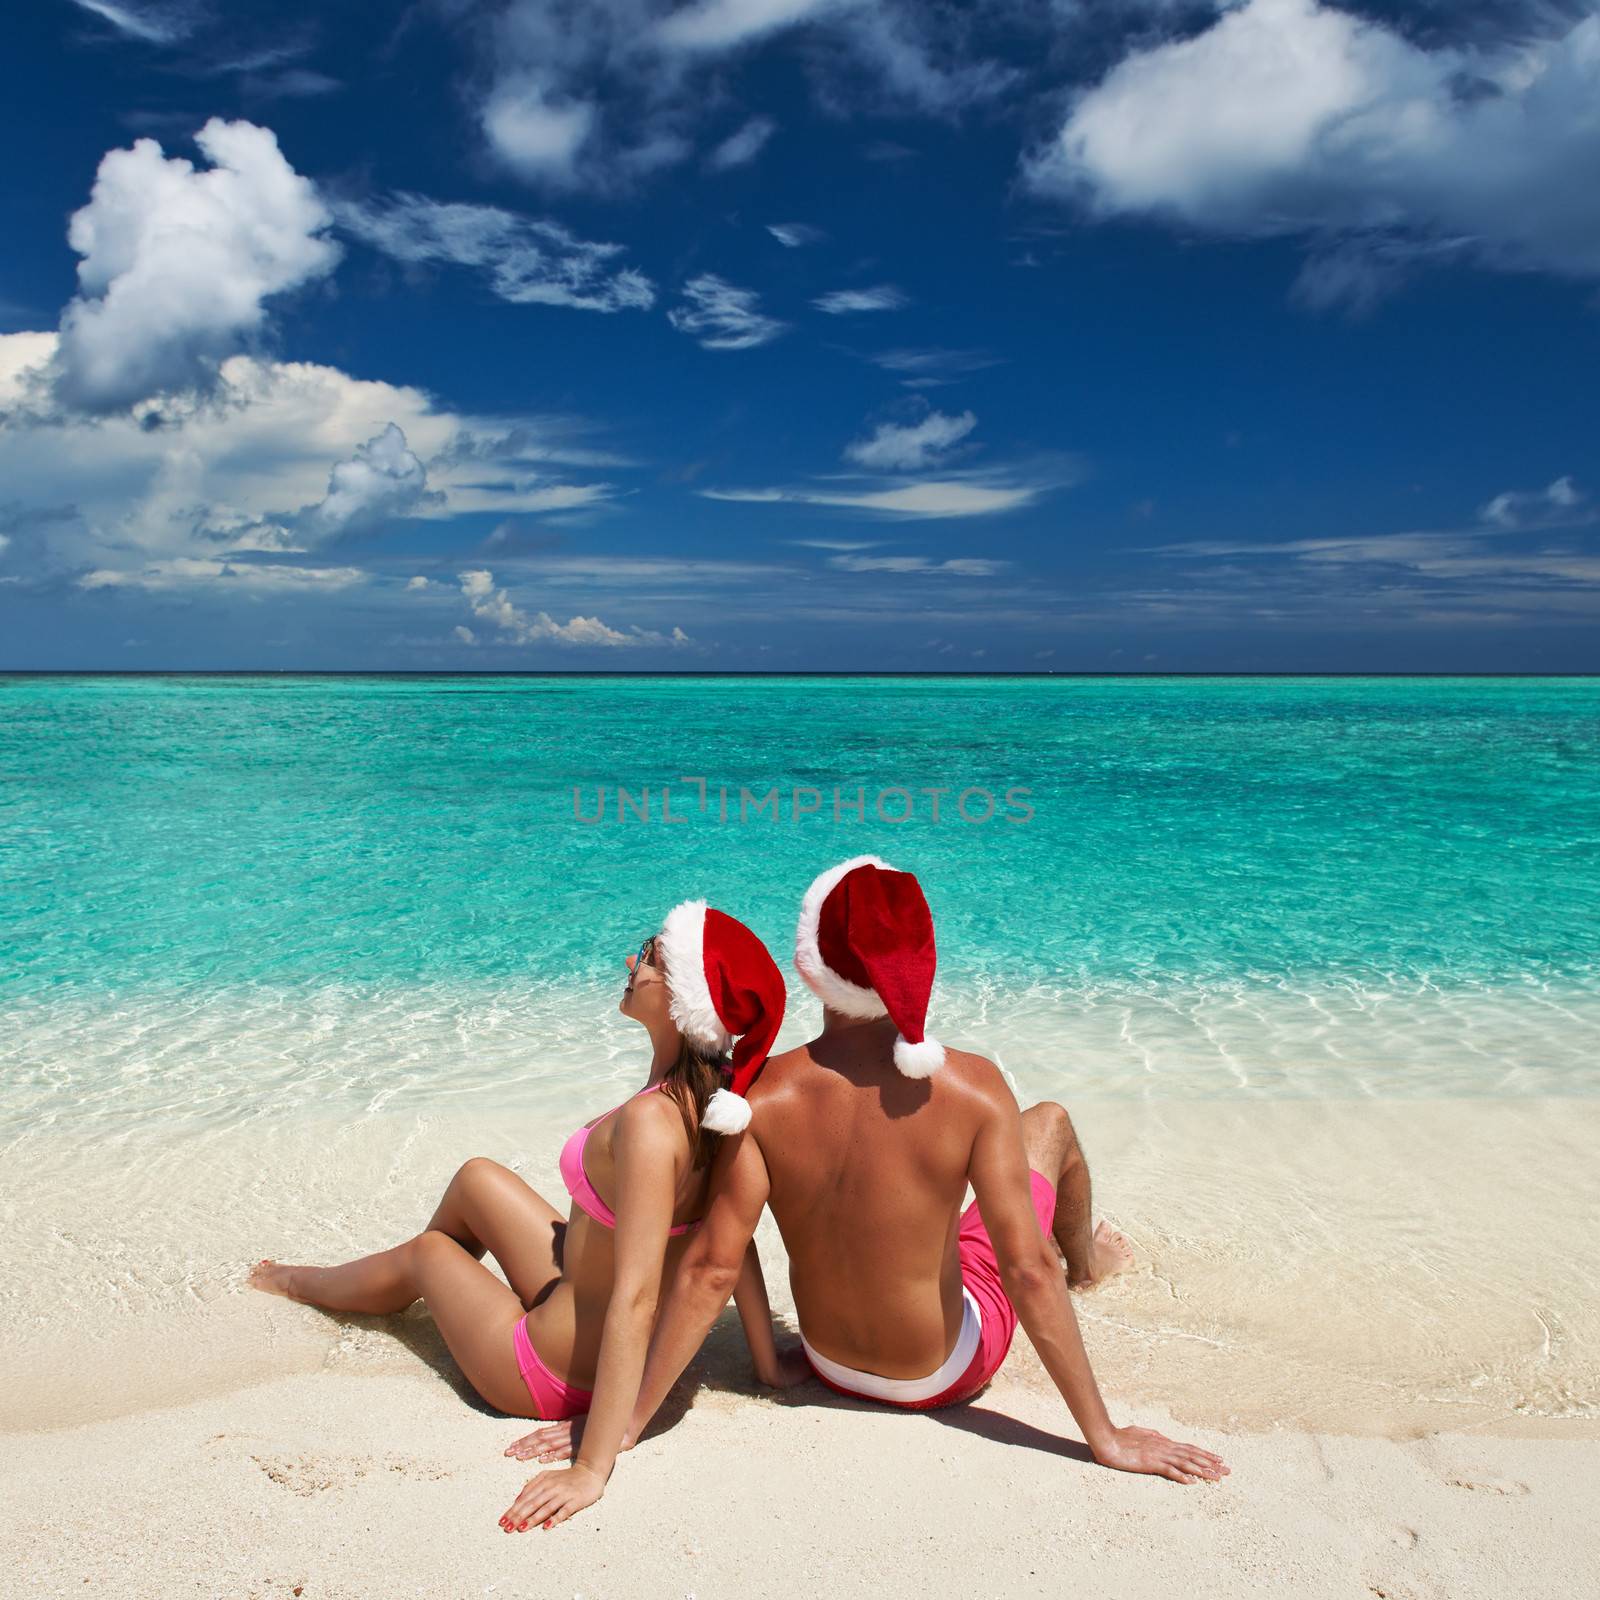 Couple in santa's hat on a tropical beach at Maldives